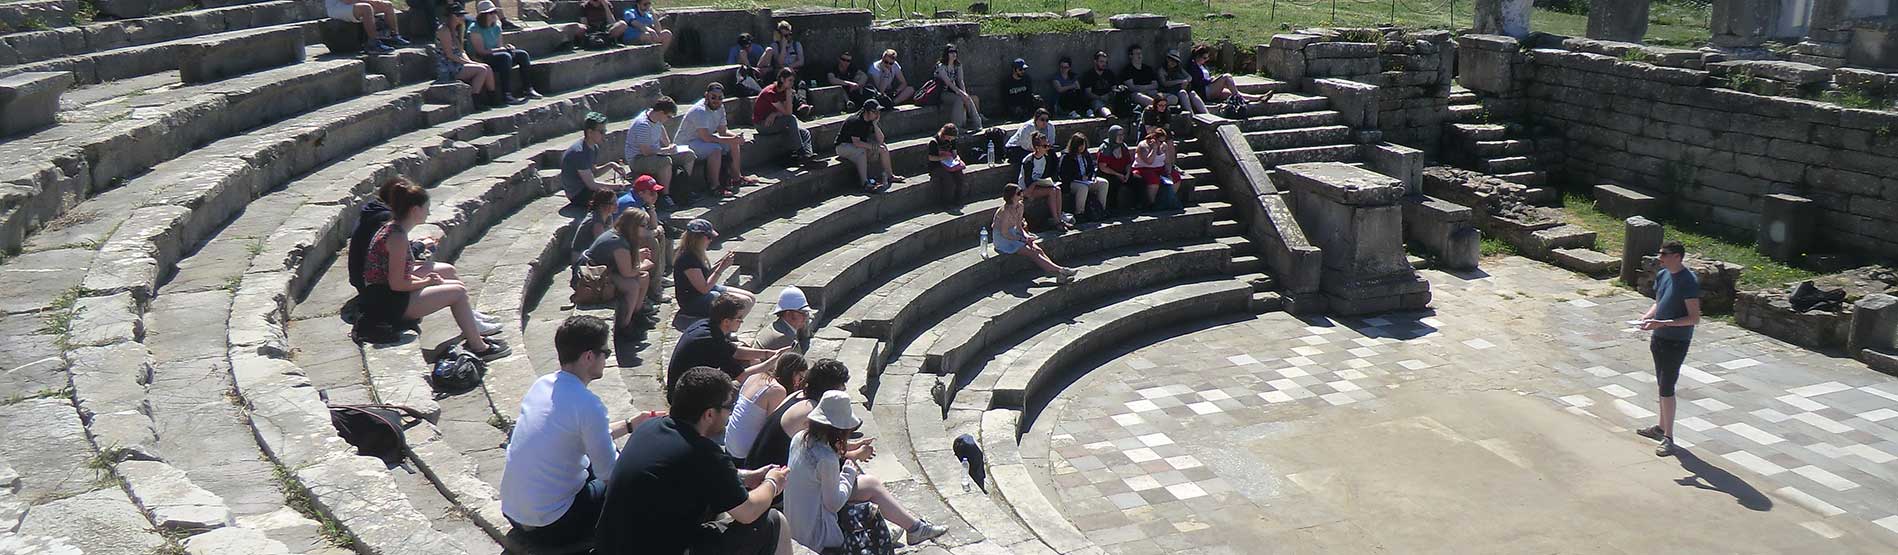 An image of people sitting in an amphitheater